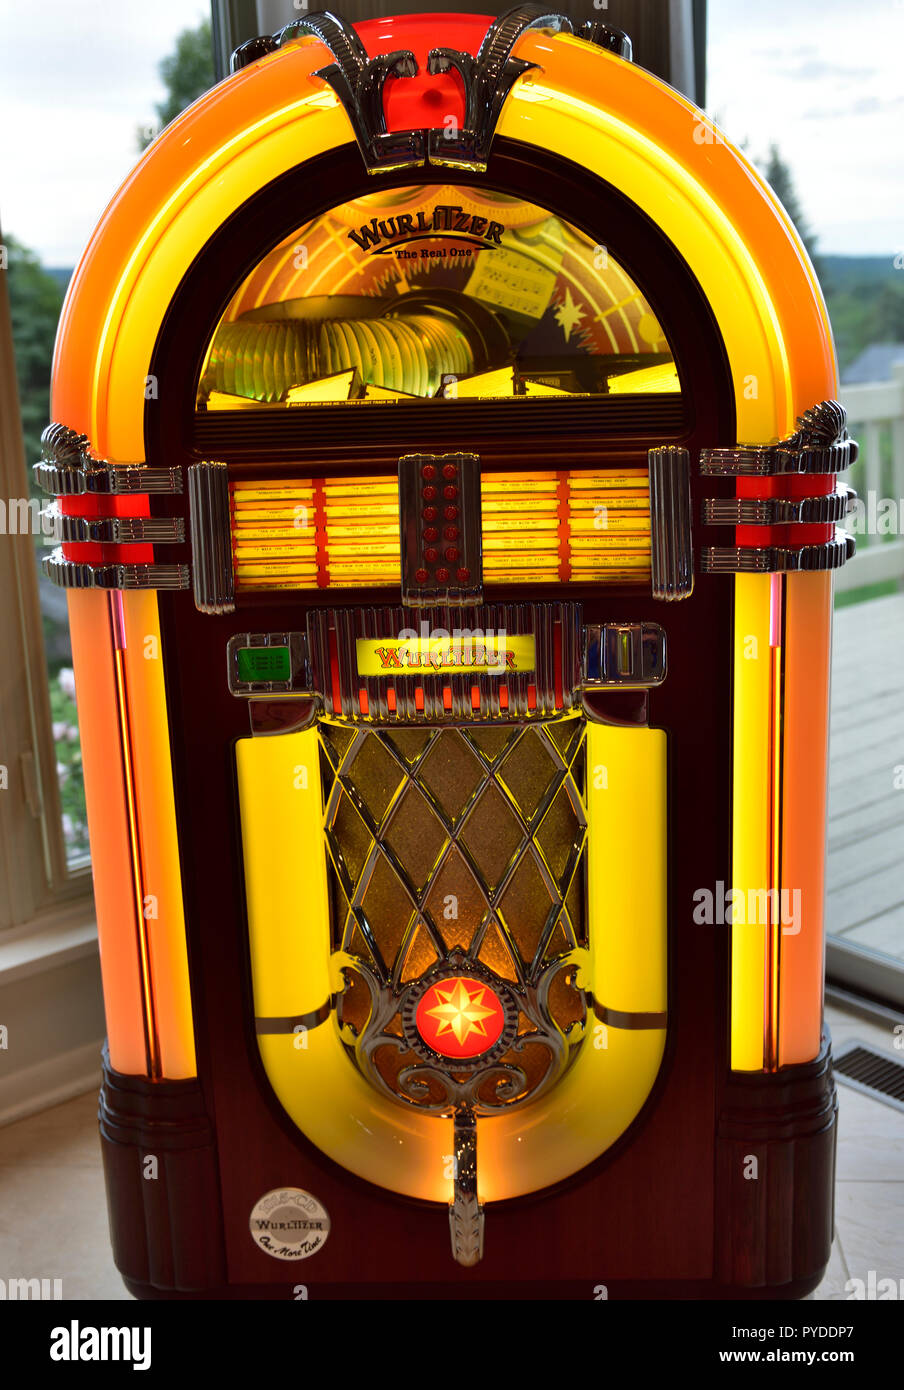 Wurlitzer automatic One More Time 101 CD player jukebox Stock Photo